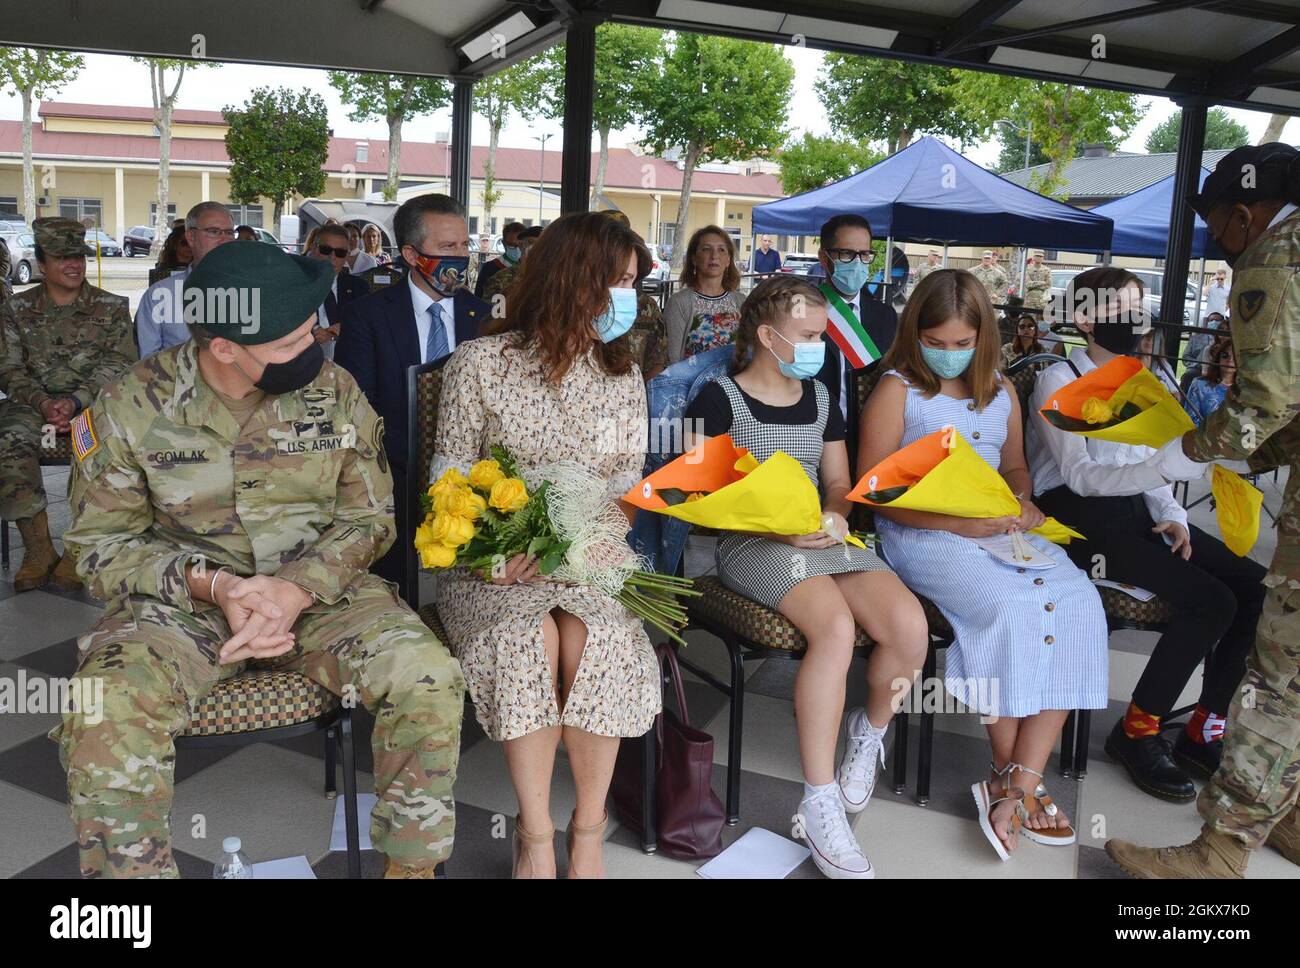 VICENZA, Italy (July 16, 2021) - Col. Daniel J. Vogel relinquished command July 16, 2021, to incoming commander Col. Matthew J. Gomlak during the United States Army Garrison Italy Change of Command Ceremony on Caserma Ederle’s Hoekstra Field.  Col. Gomlak arrived recently from the U.S. Army John F. Kennedy Special Warfare Center and School at Fort Bragg, North Carolina, where he served as the Chief of Staff, while Col. Vogel now heads to the Warfighting and Leadership Department at the Air War College in Alabama. Stock Photo